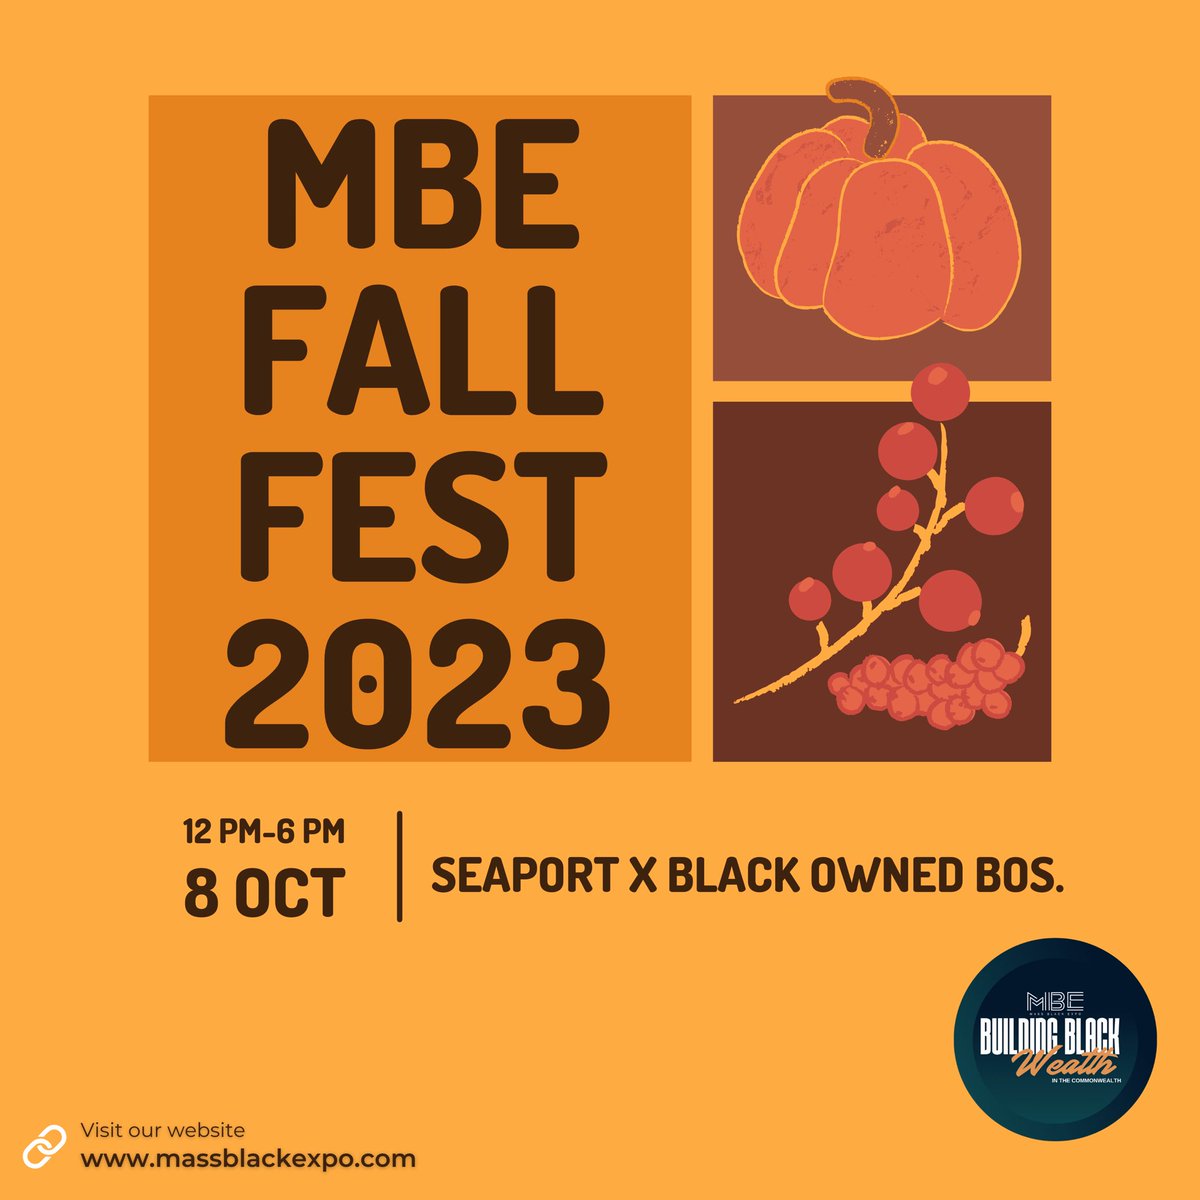 We’re not done yet! Join BECMA at @gracebynia for The Celebration of Black Joy from 12 - 3 pm tomorrow as well as the Mass Black Expo Fall Fest with @blackownedbos at the Seaport from 12 - 6 pm